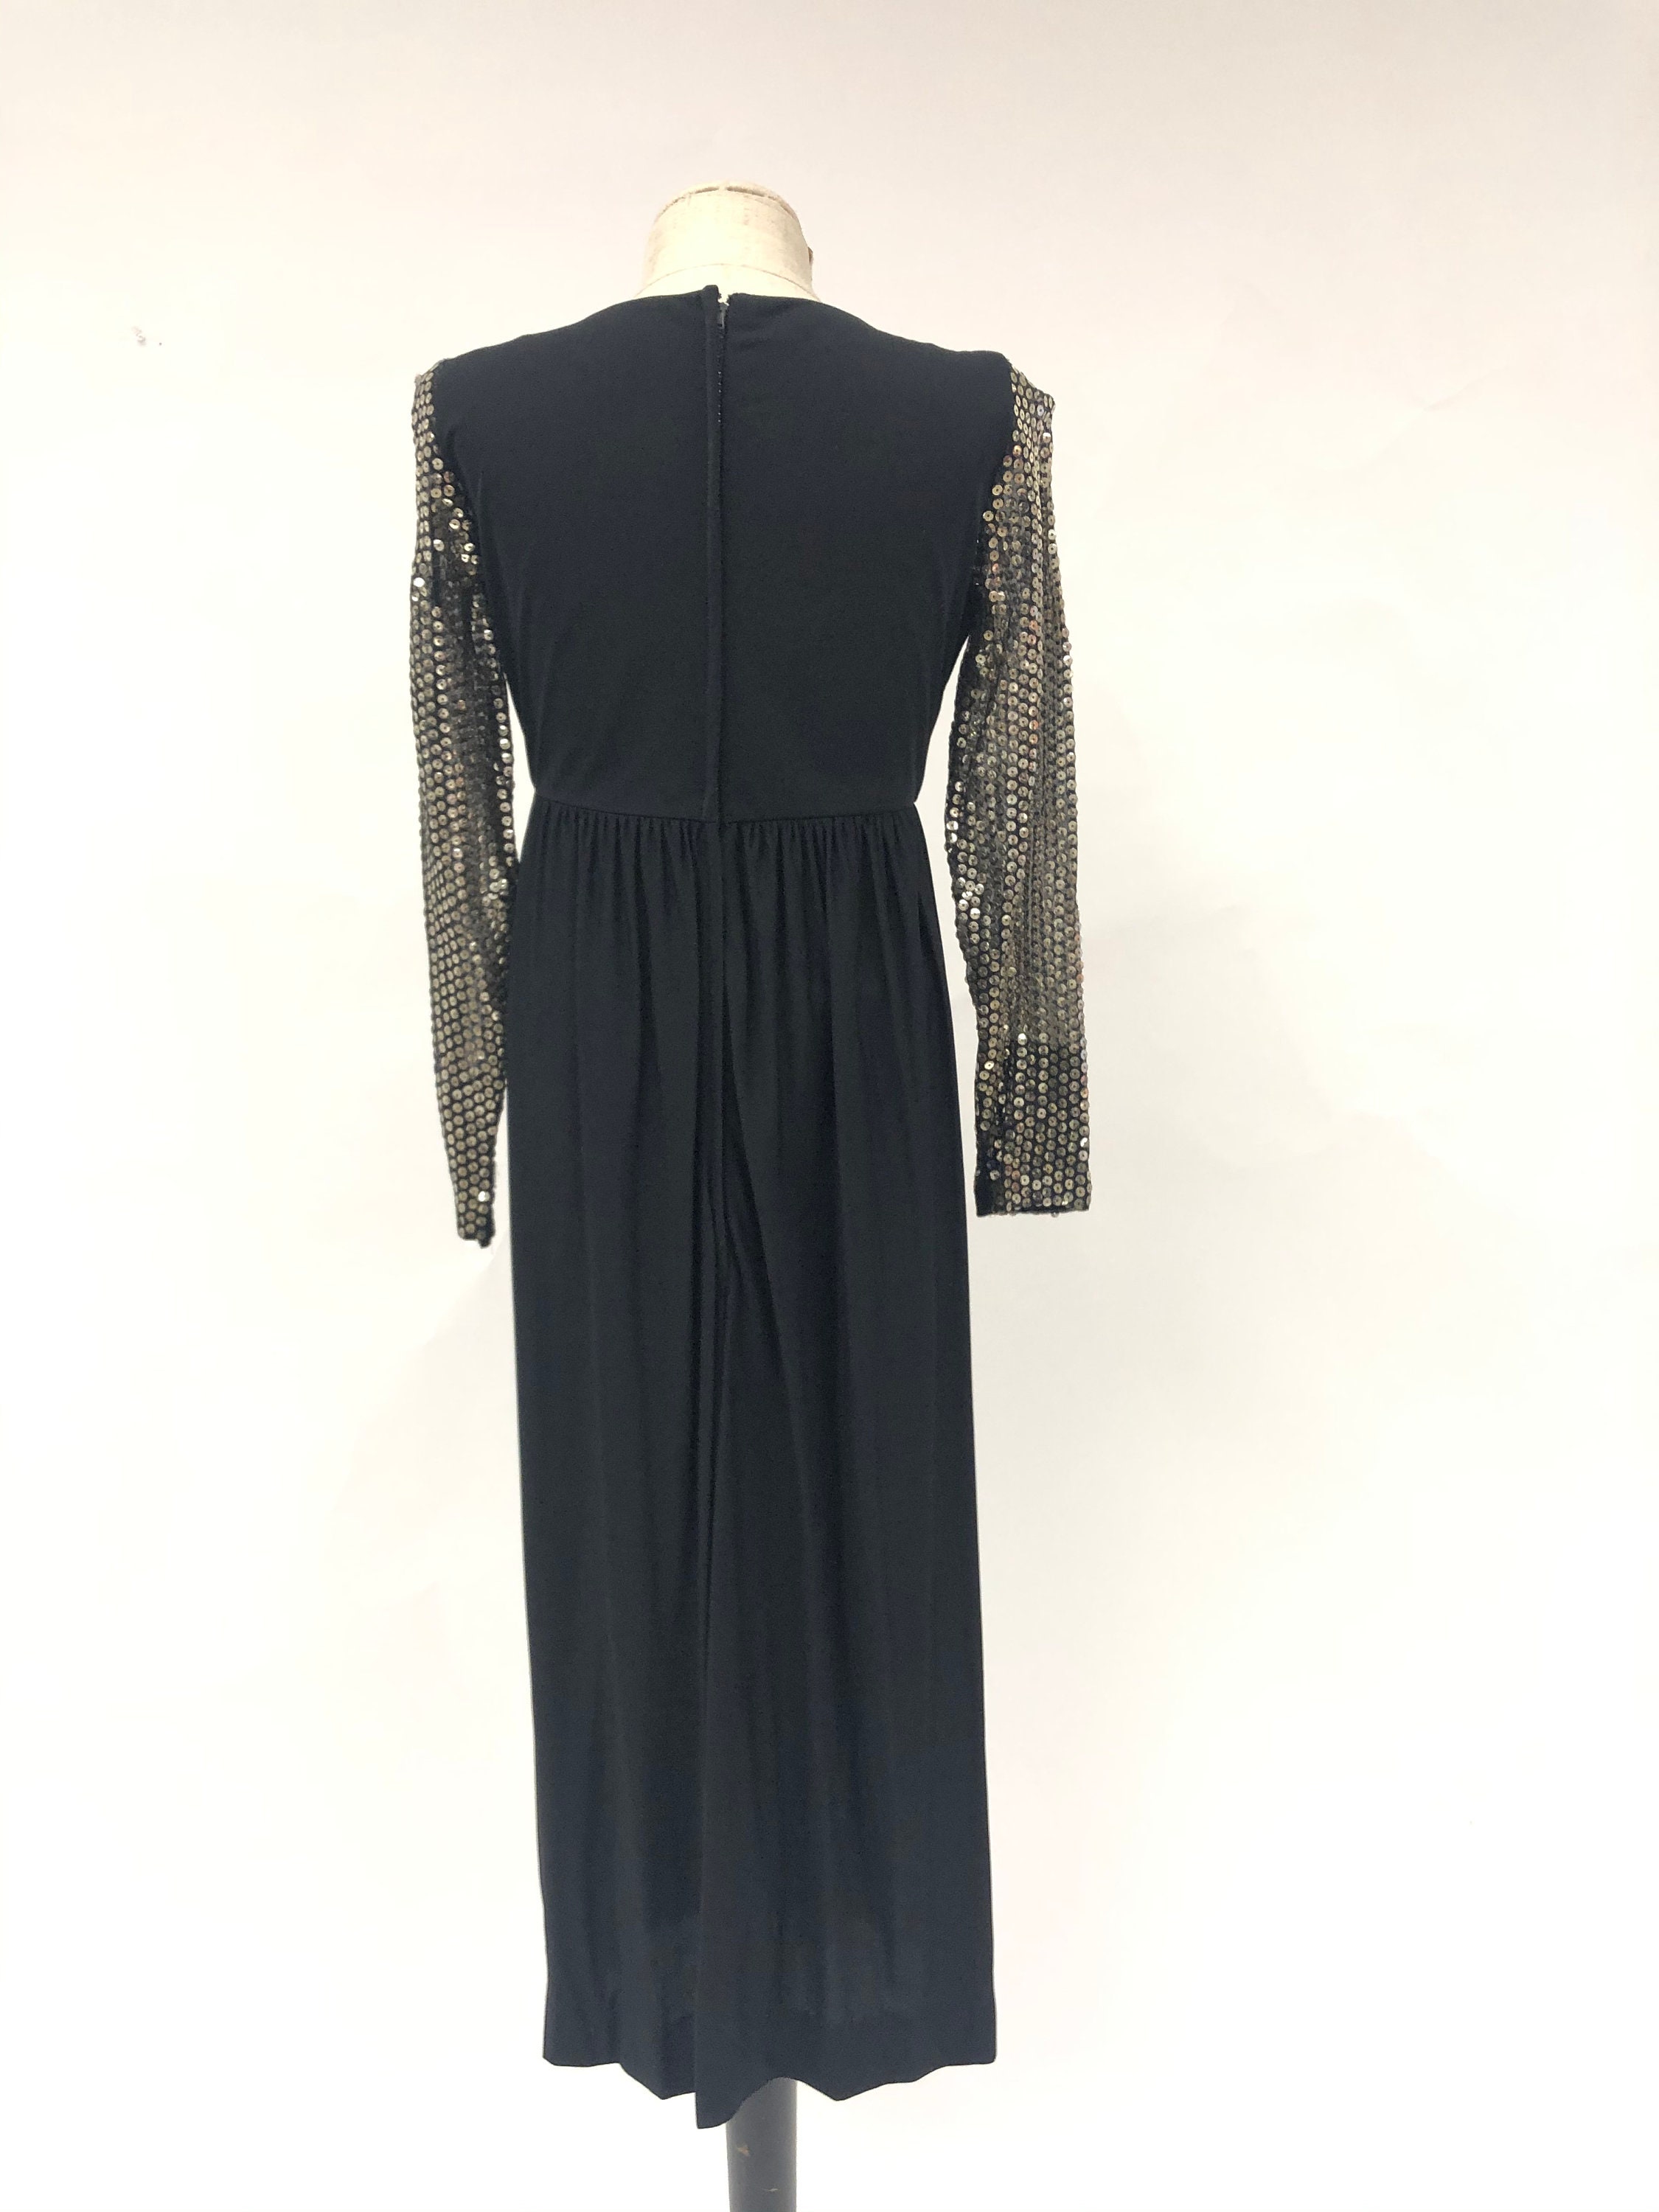 Vintage 1970's Evening Dress With Sequin Sleeves - Etsy UK